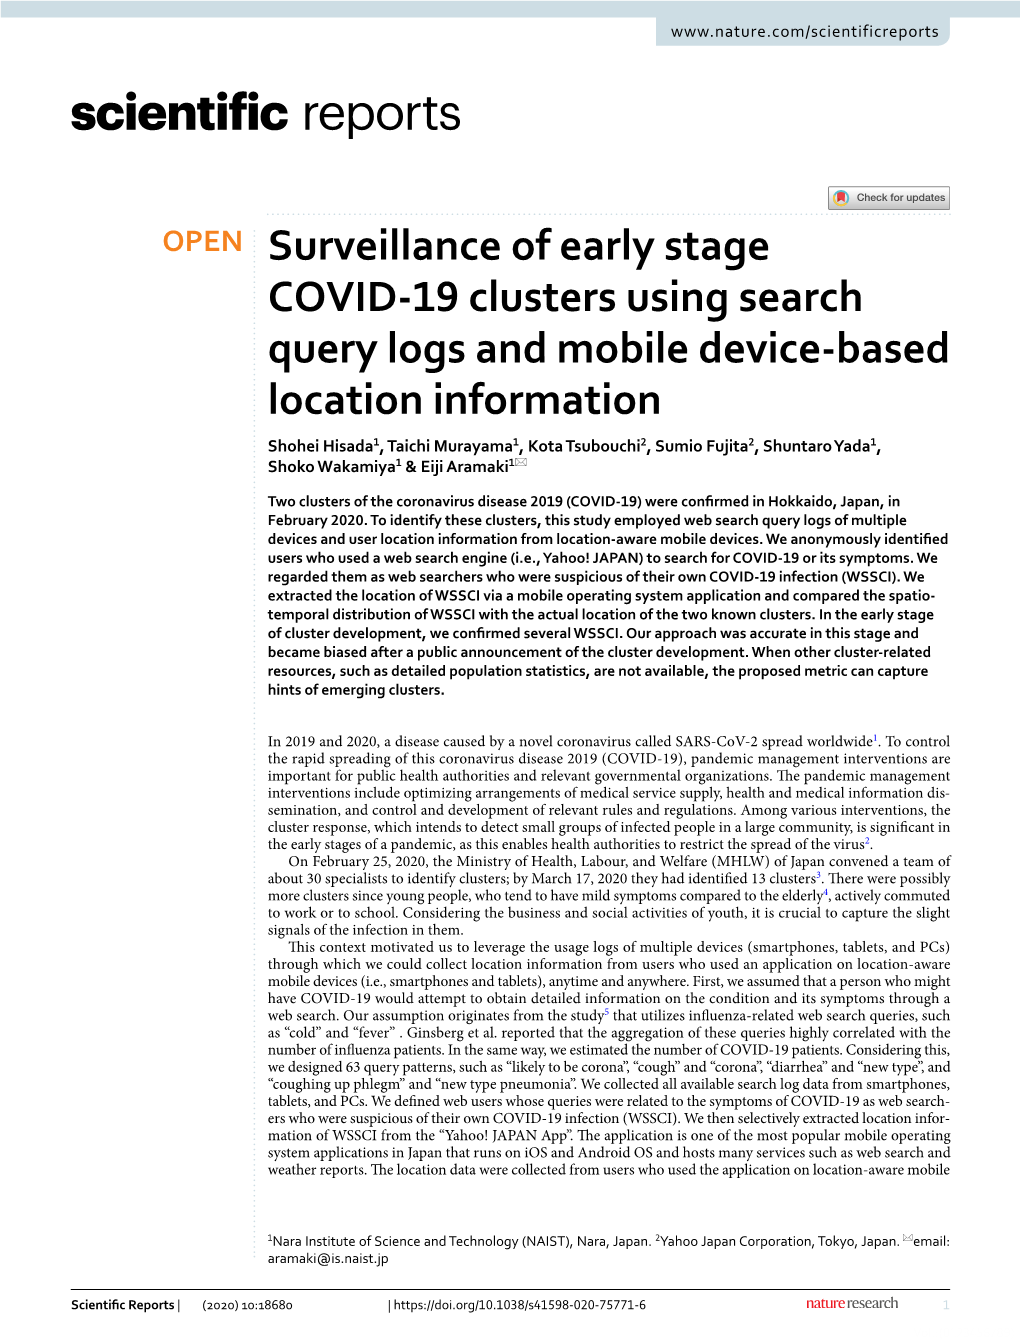 Surveillance of Early Stage COVID-19 Clusters Using Search Query Logs